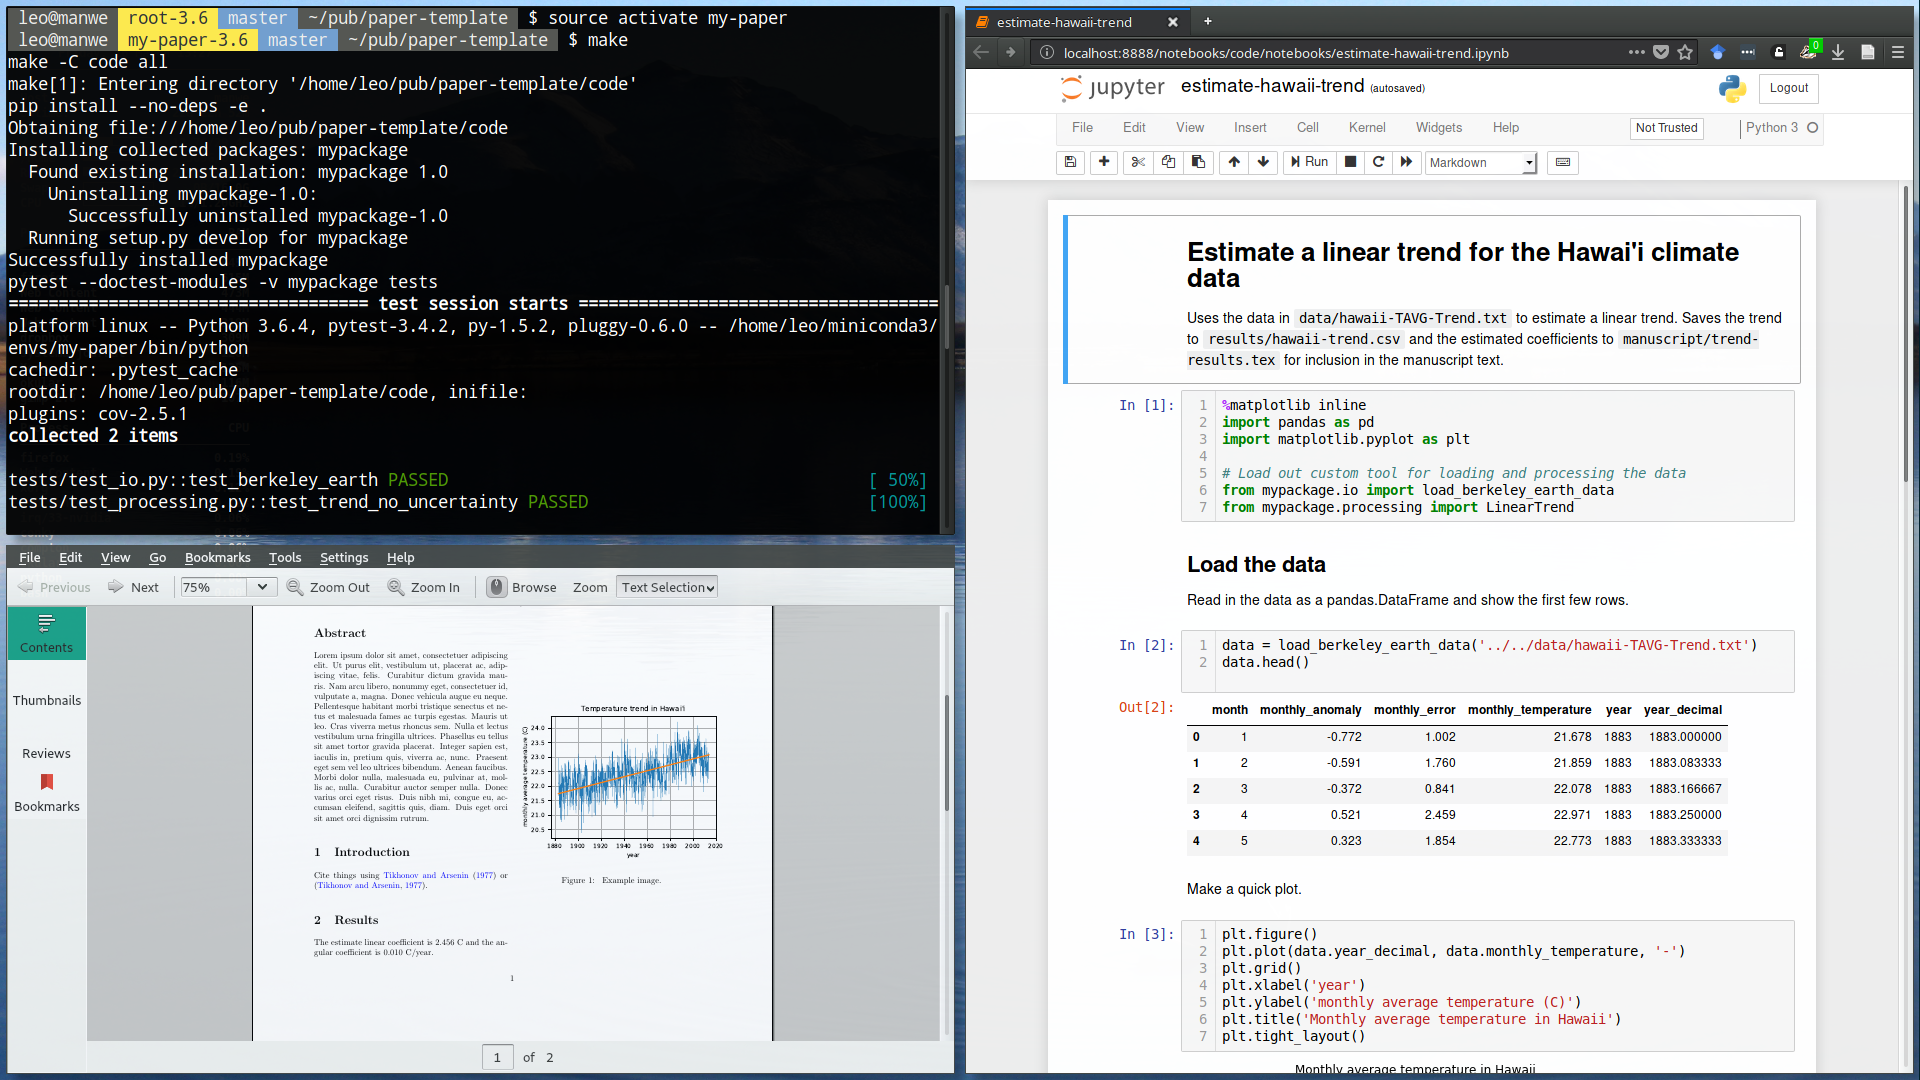 Screenshot of running "make" in the paper-template with the final paper PDF and a Jupyter notebook.